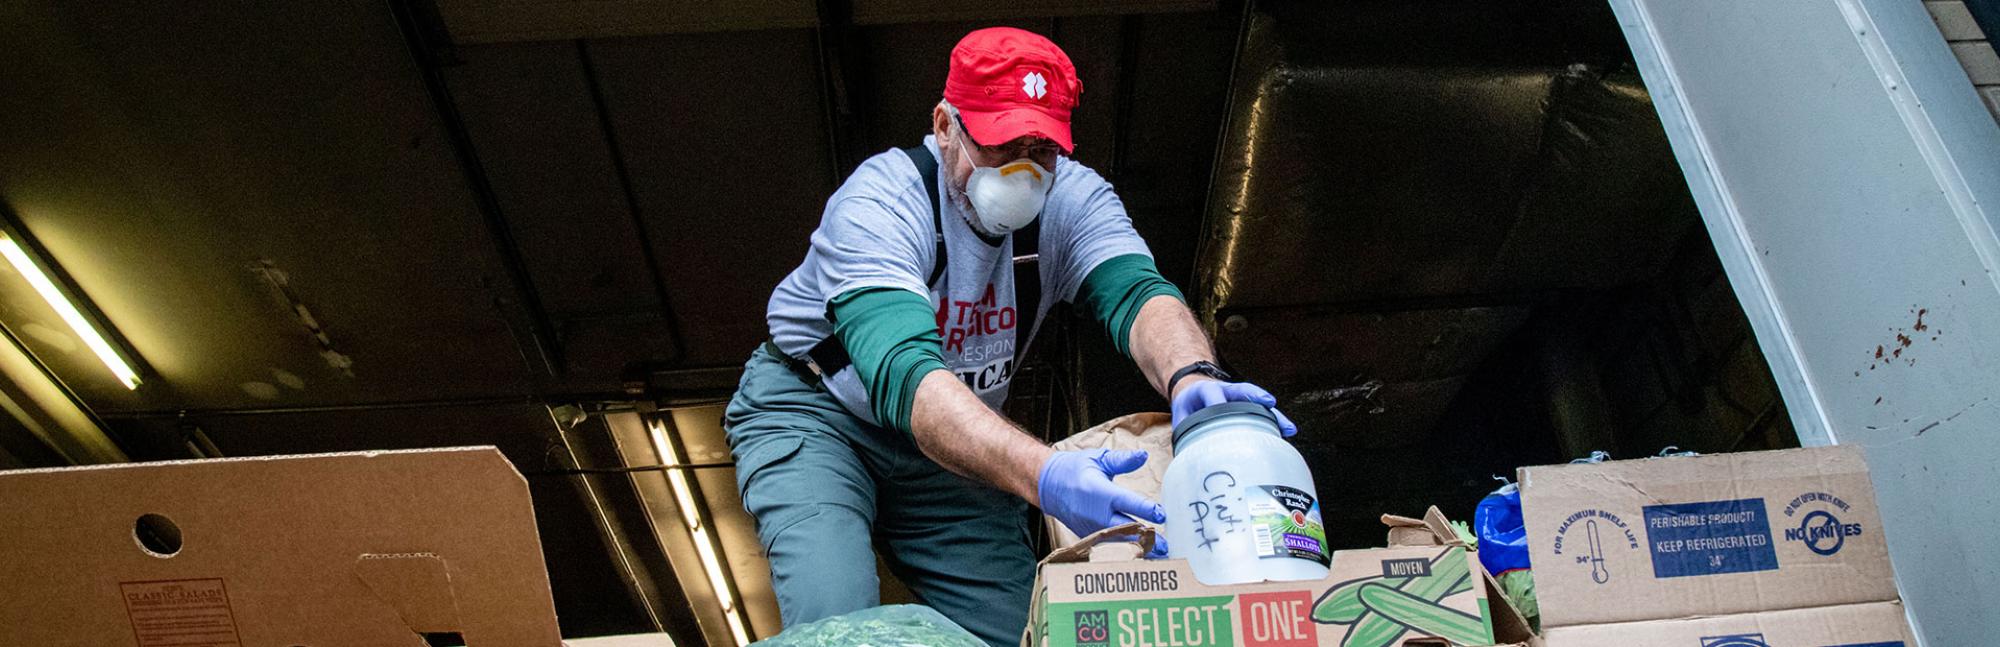 Masked volunteer unpacks boxes of redistributed food from lorry